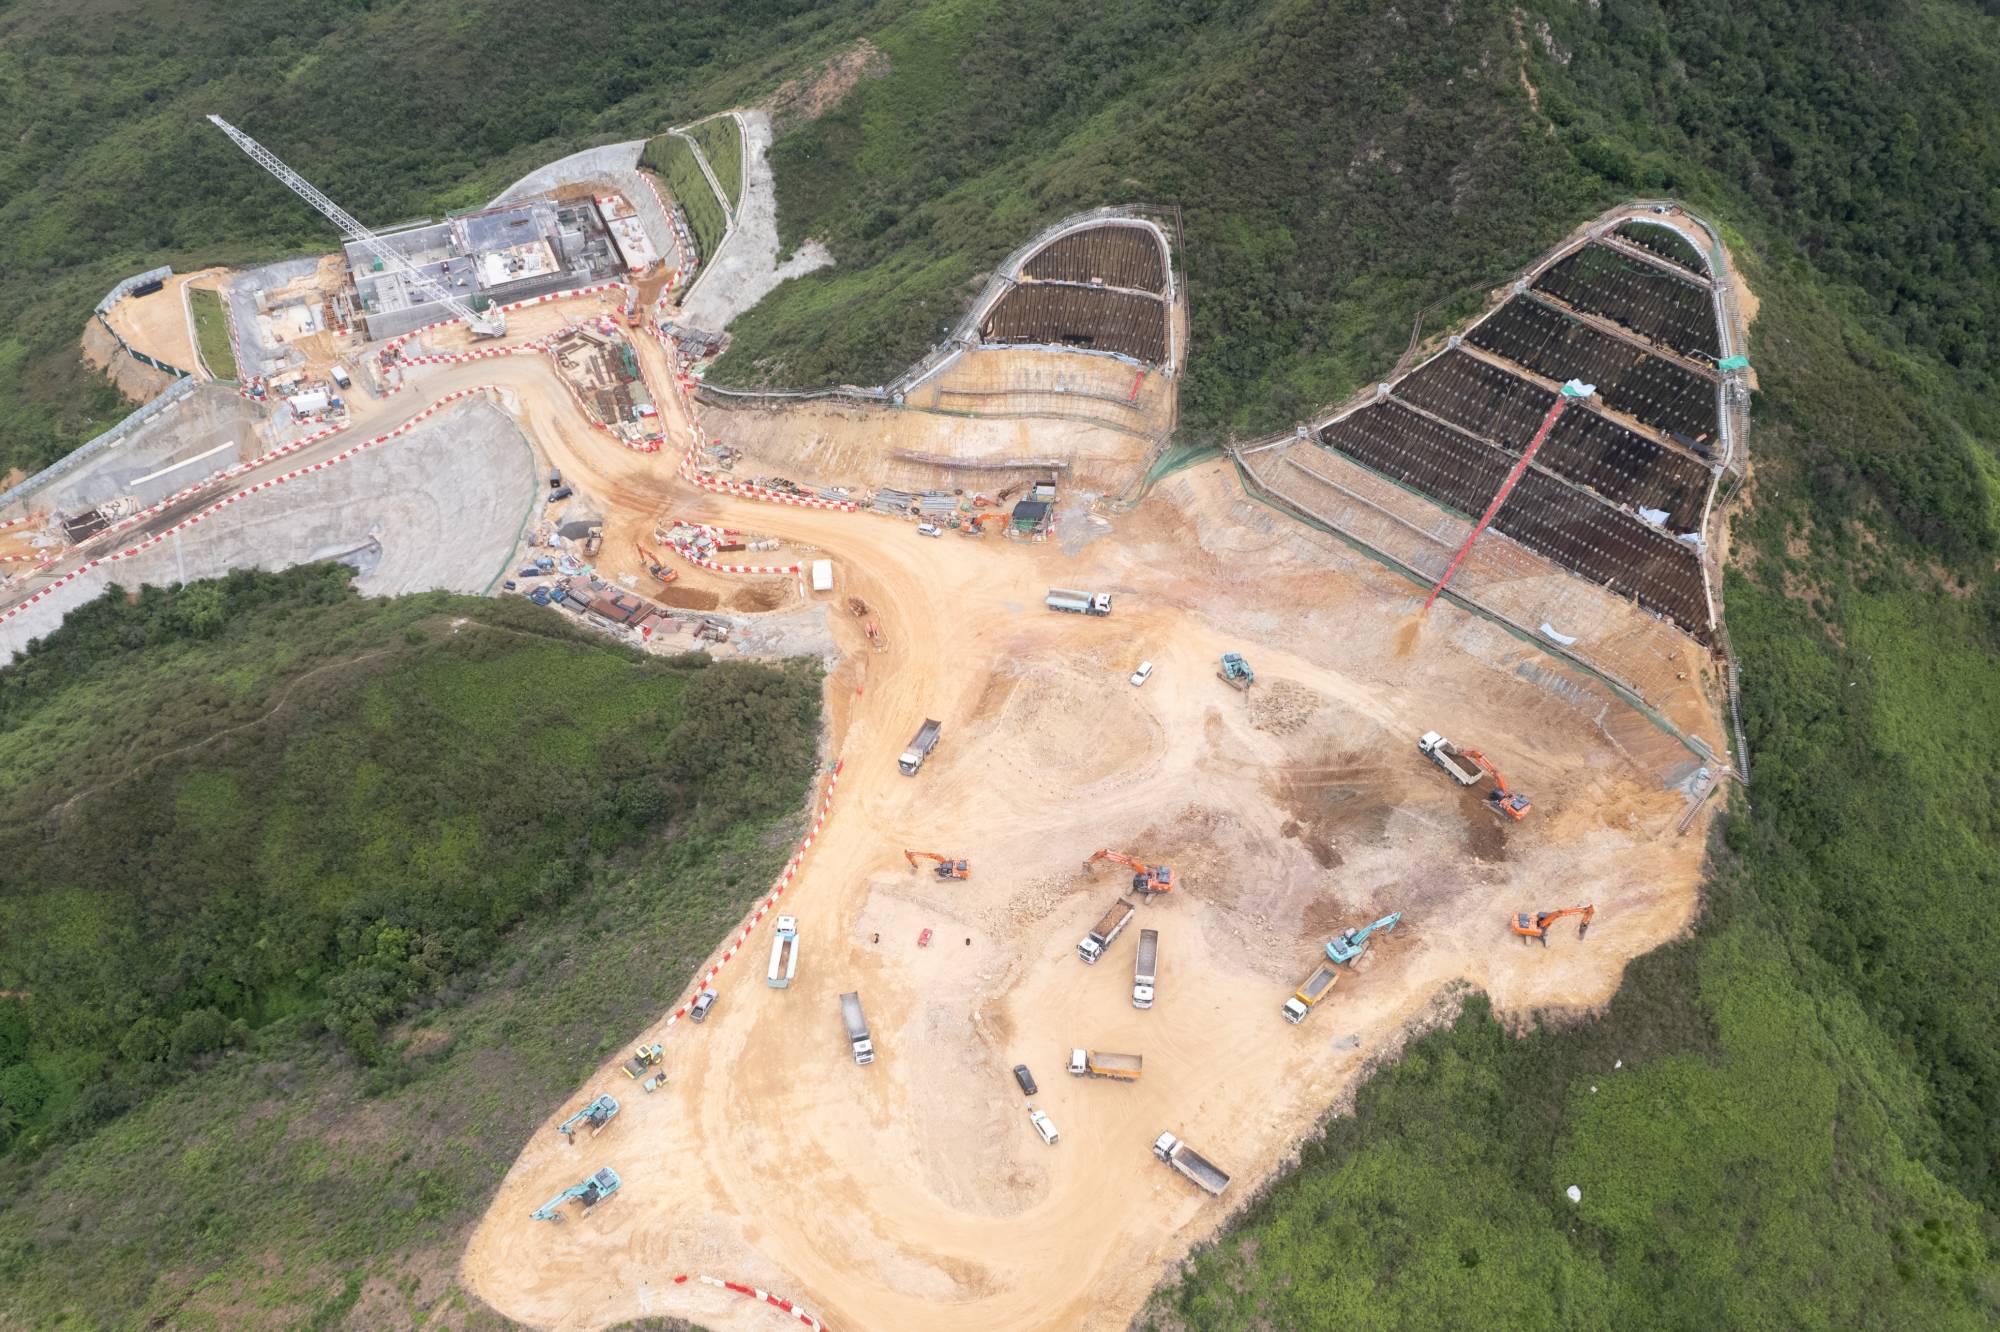 To meet the needs of the NDA, the CEDD is building large-scale infrastructure in the KTN NDA, including two service reservoirs for fresh water and flushing water respectively on Tai Shek Mo Mountain. Pictured above is the excavation works for the fresh water service reservoir.